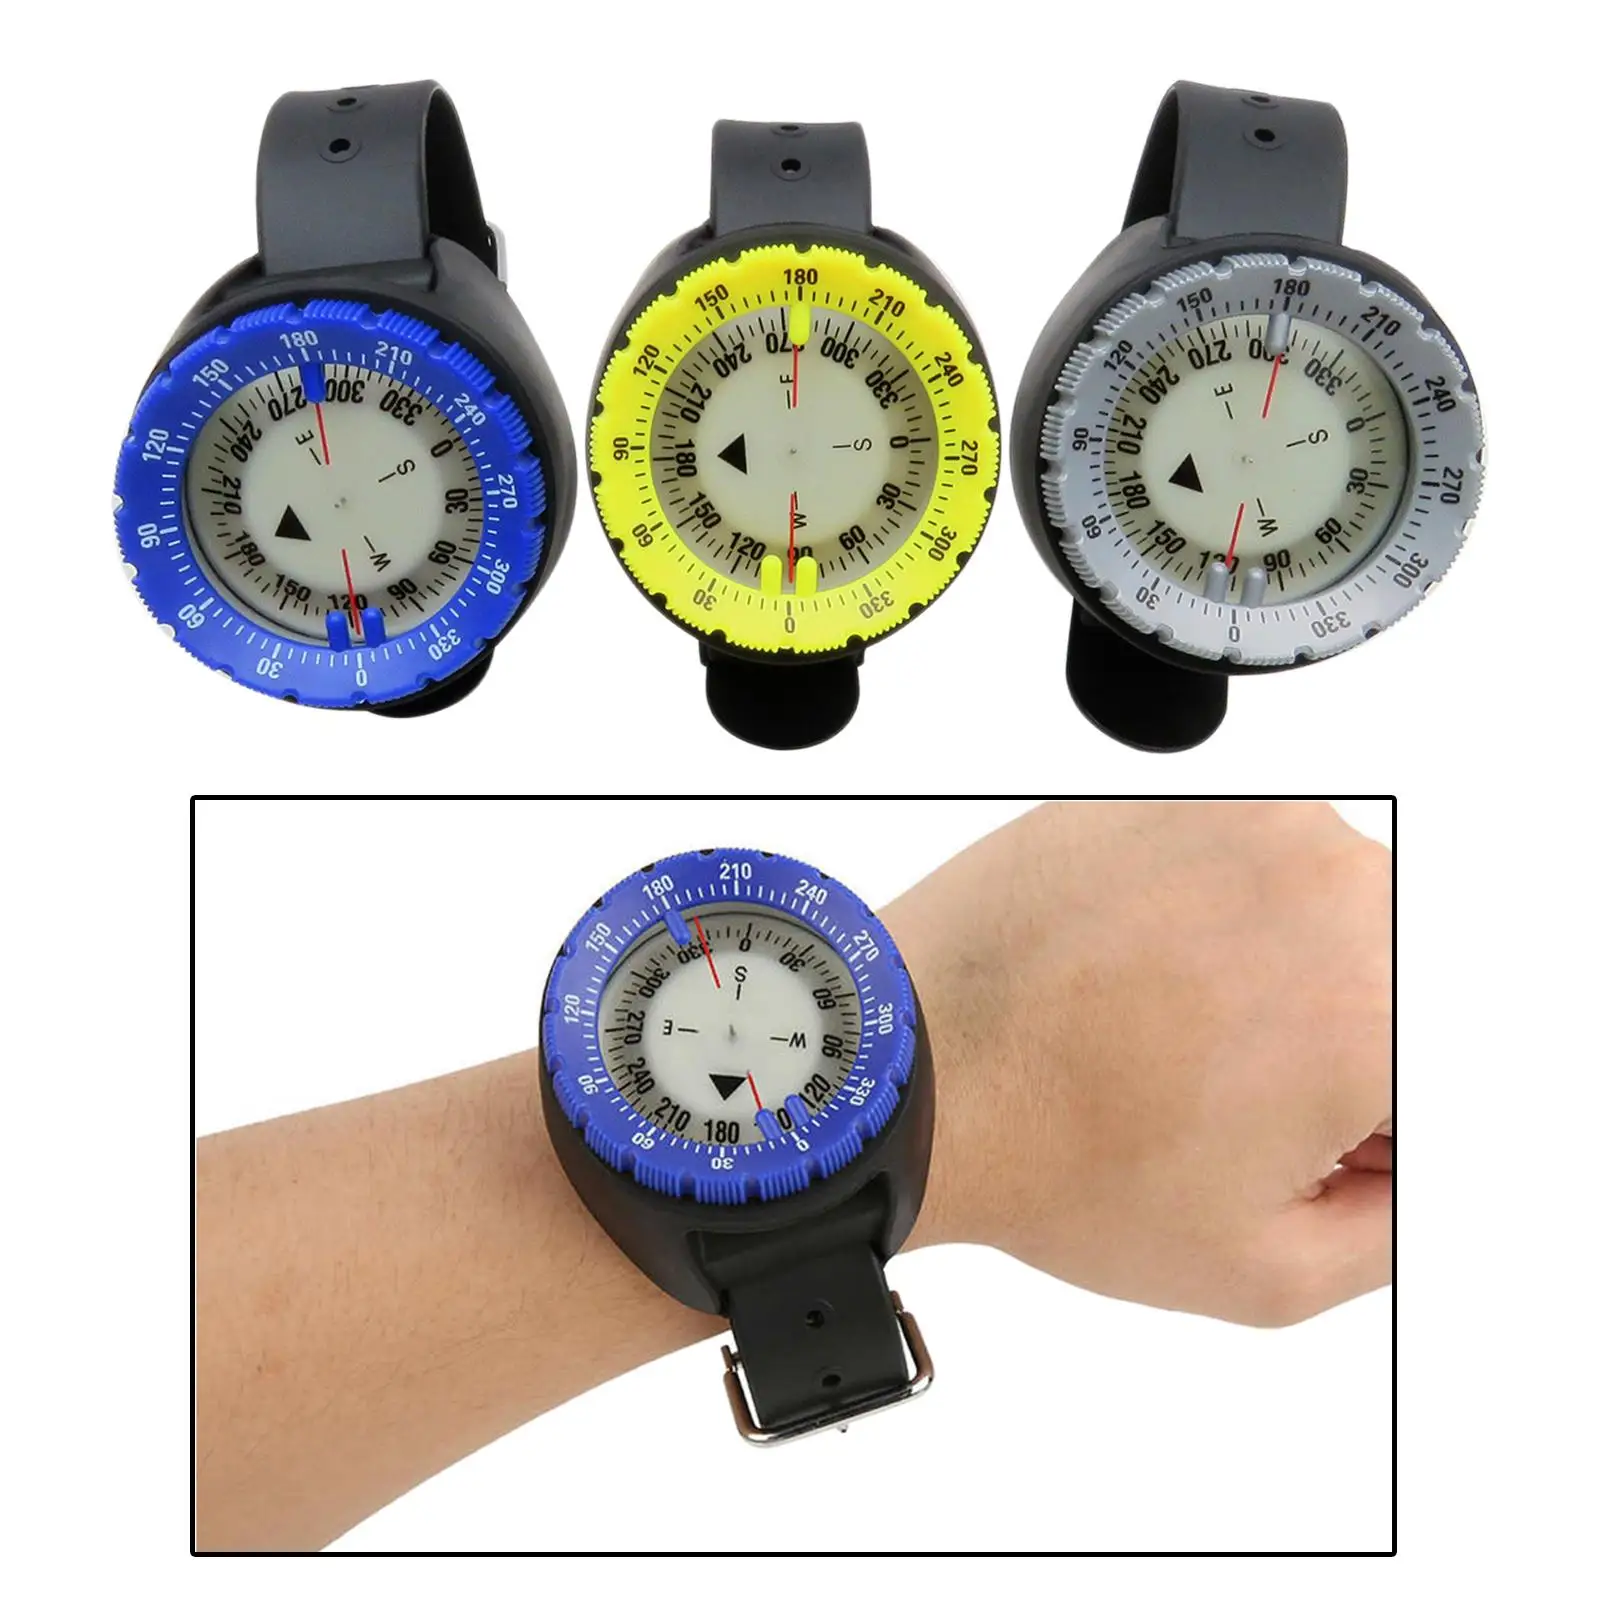 Waterproof Wrist Mount dive Compass for Scuba Underwater Gauge with Night Vision 